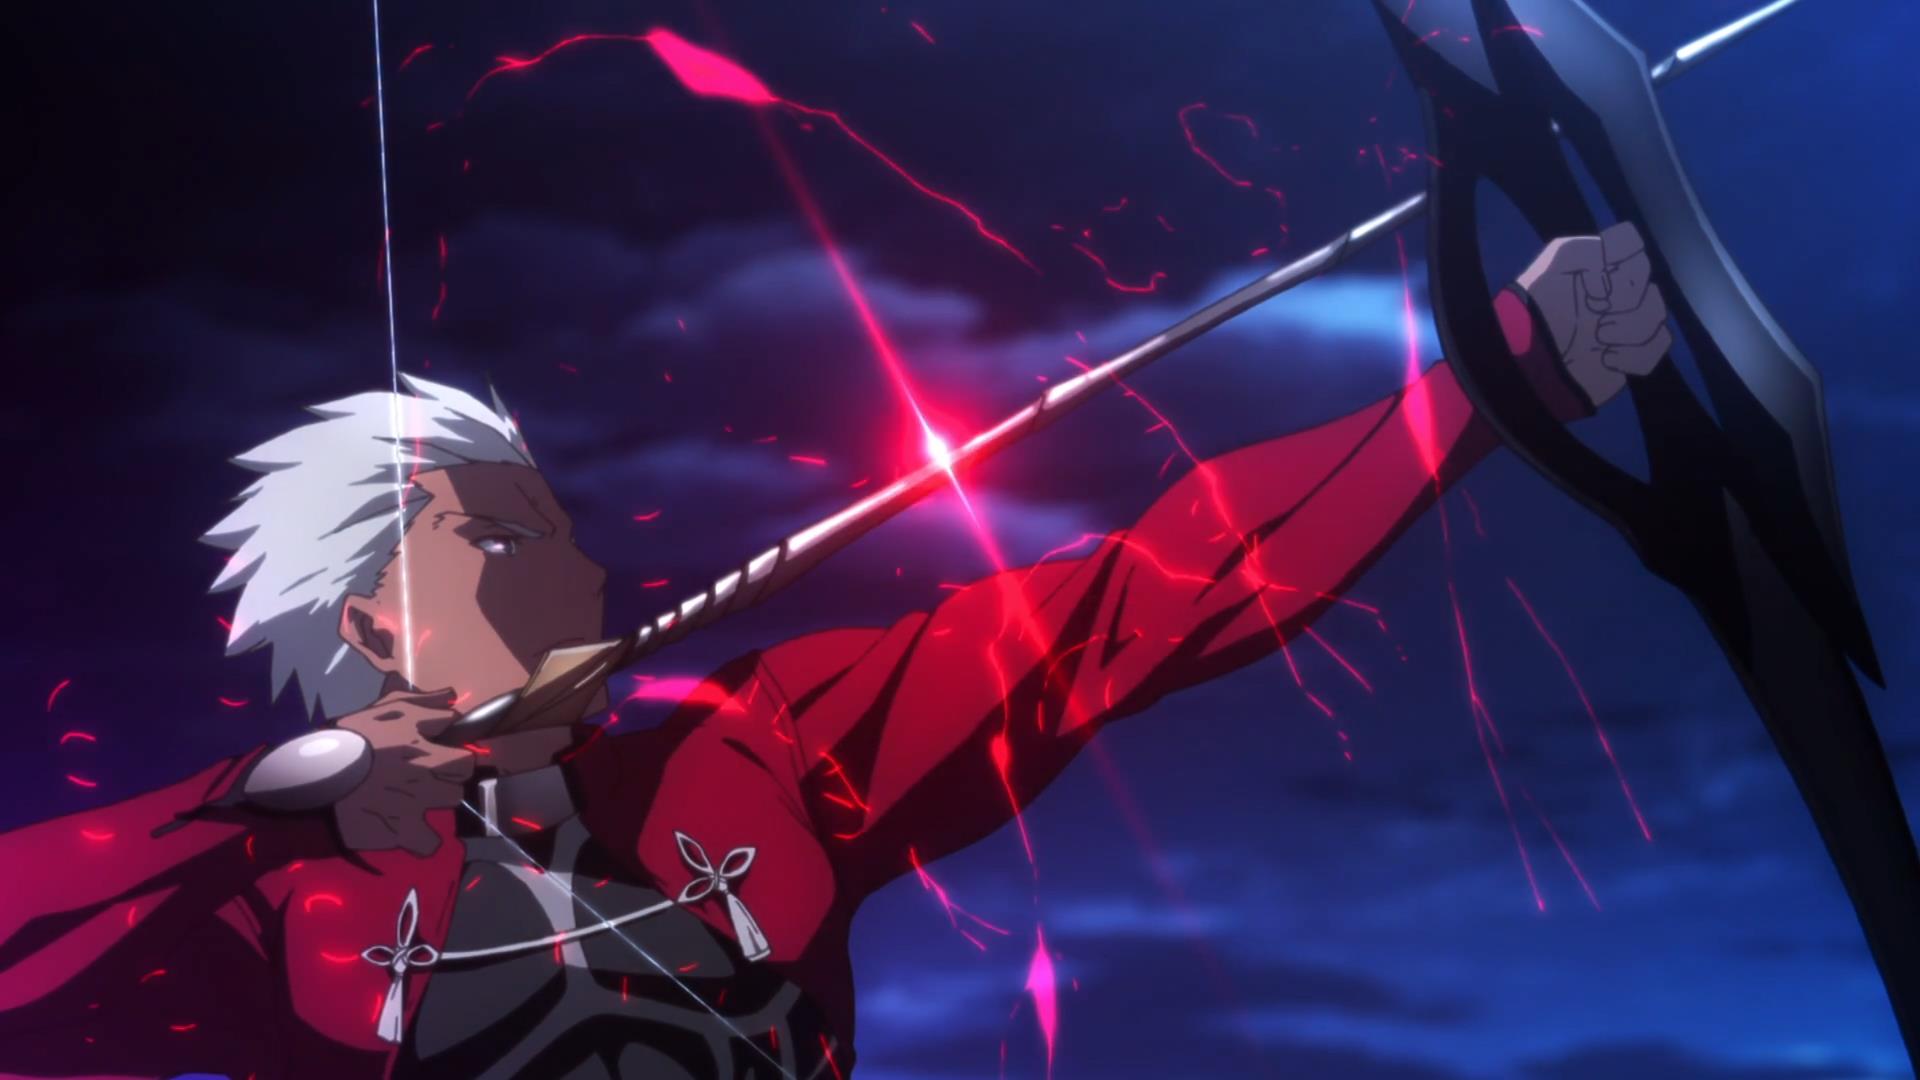 Fate/stay night Unlimited Blade Works, Episode 1: Saving Everyone